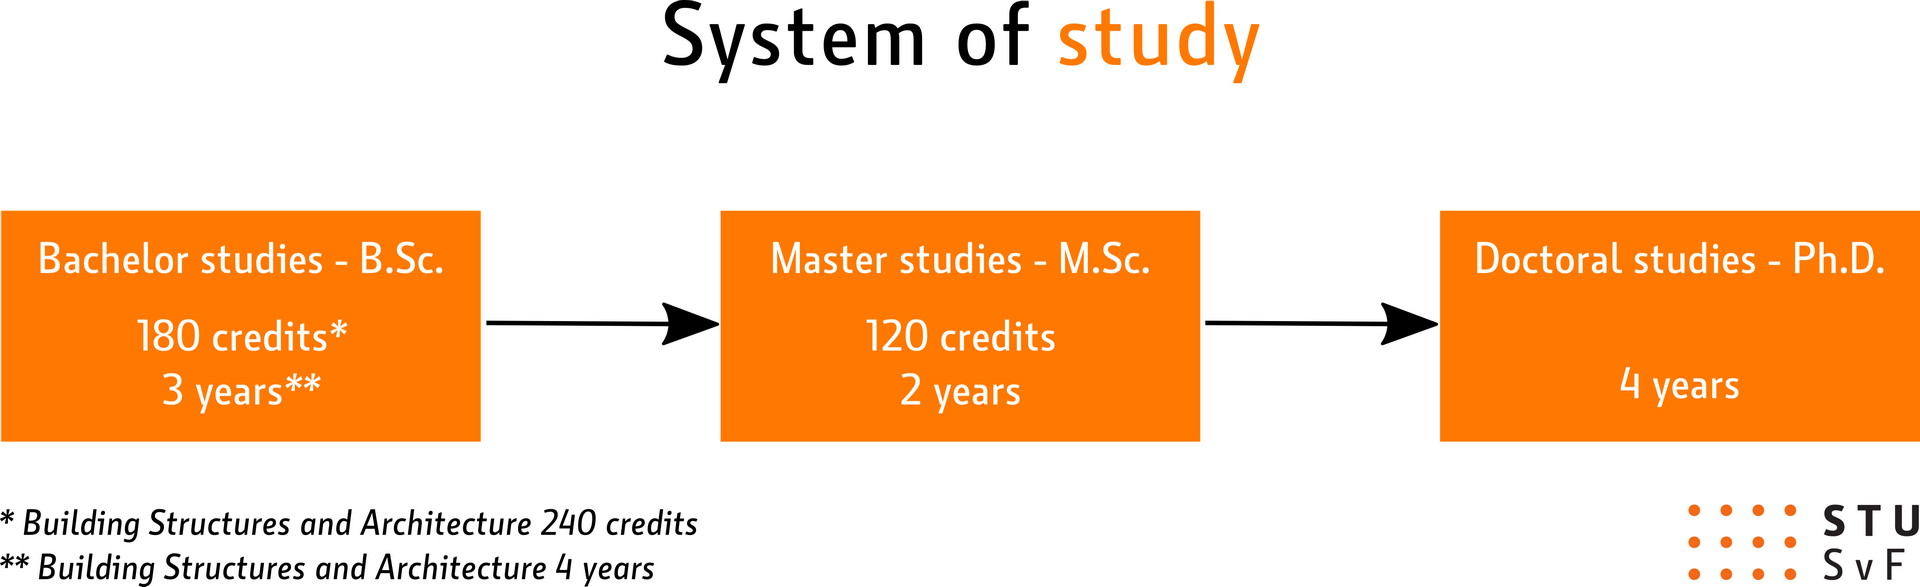 System of study